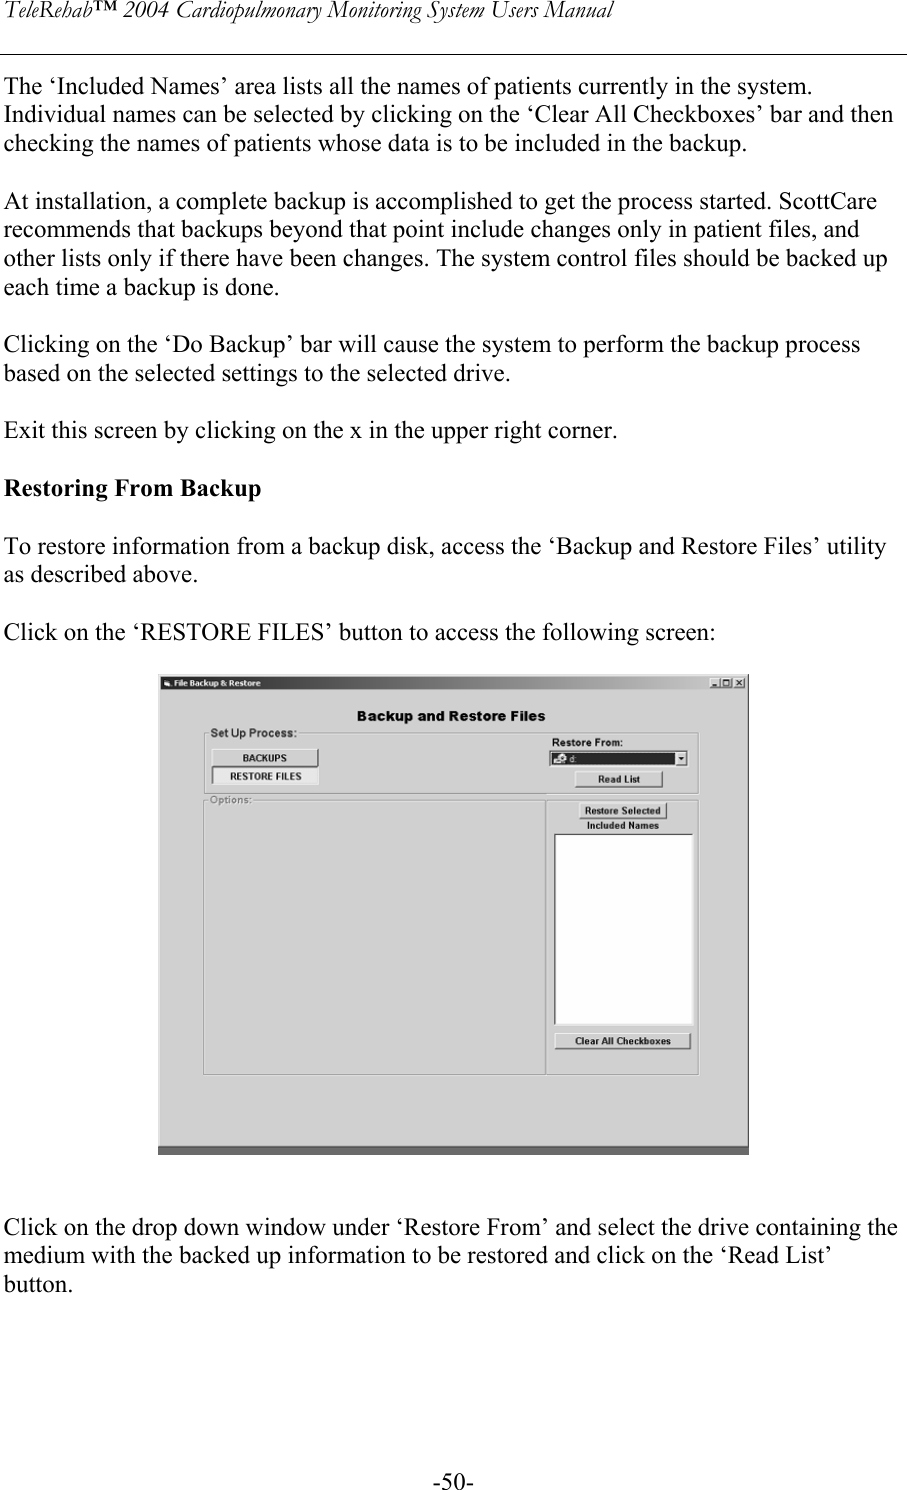 TeleRehab™ 2004 Cardiopulmonary Monitoring System Users Manual    -50-The ‘Included Names’ area lists all the names of patients currently in the system. Individual names can be selected by clicking on the ‘Clear All Checkboxes’ bar and then checking the names of patients whose data is to be included in the backup.  At installation, a complete backup is accomplished to get the process started. ScottCare recommends that backups beyond that point include changes only in patient files, and  other lists only if there have been changes. The system control files should be backed up each time a backup is done.  Clicking on the ‘Do Backup’ bar will cause the system to perform the backup process based on the selected settings to the selected drive.  Exit this screen by clicking on the x in the upper right corner.  Restoring From Backup  To restore information from a backup disk, access the ‘Backup and Restore Files’ utility as described above.  Click on the ‘RESTORE FILES’ button to access the following screen:     Click on the drop down window under ‘Restore From’ and select the drive containing the medium with the backed up information to be restored and click on the ‘Read List’ button.     